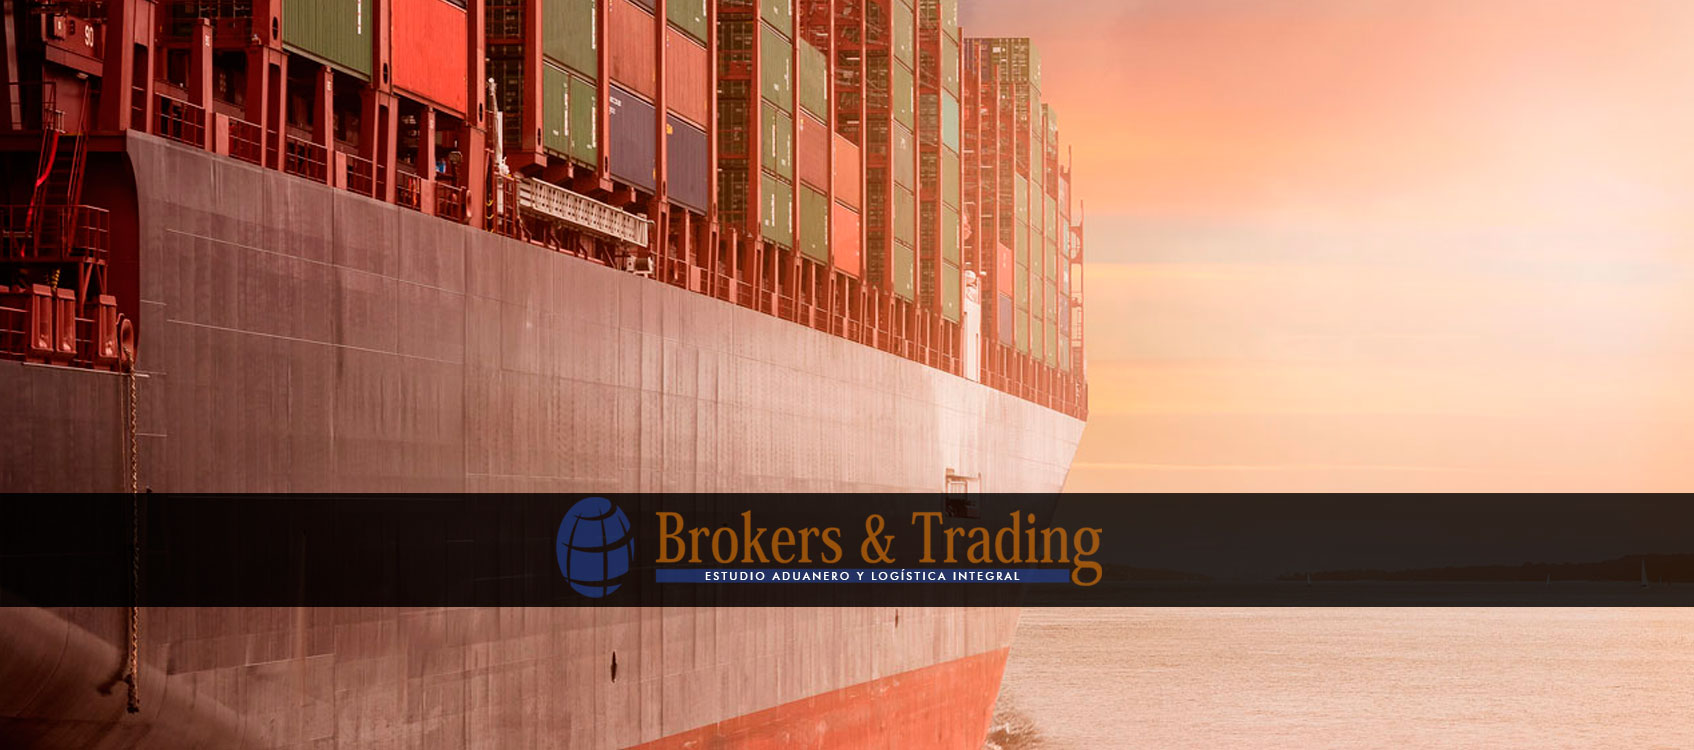 Brokers & Trading